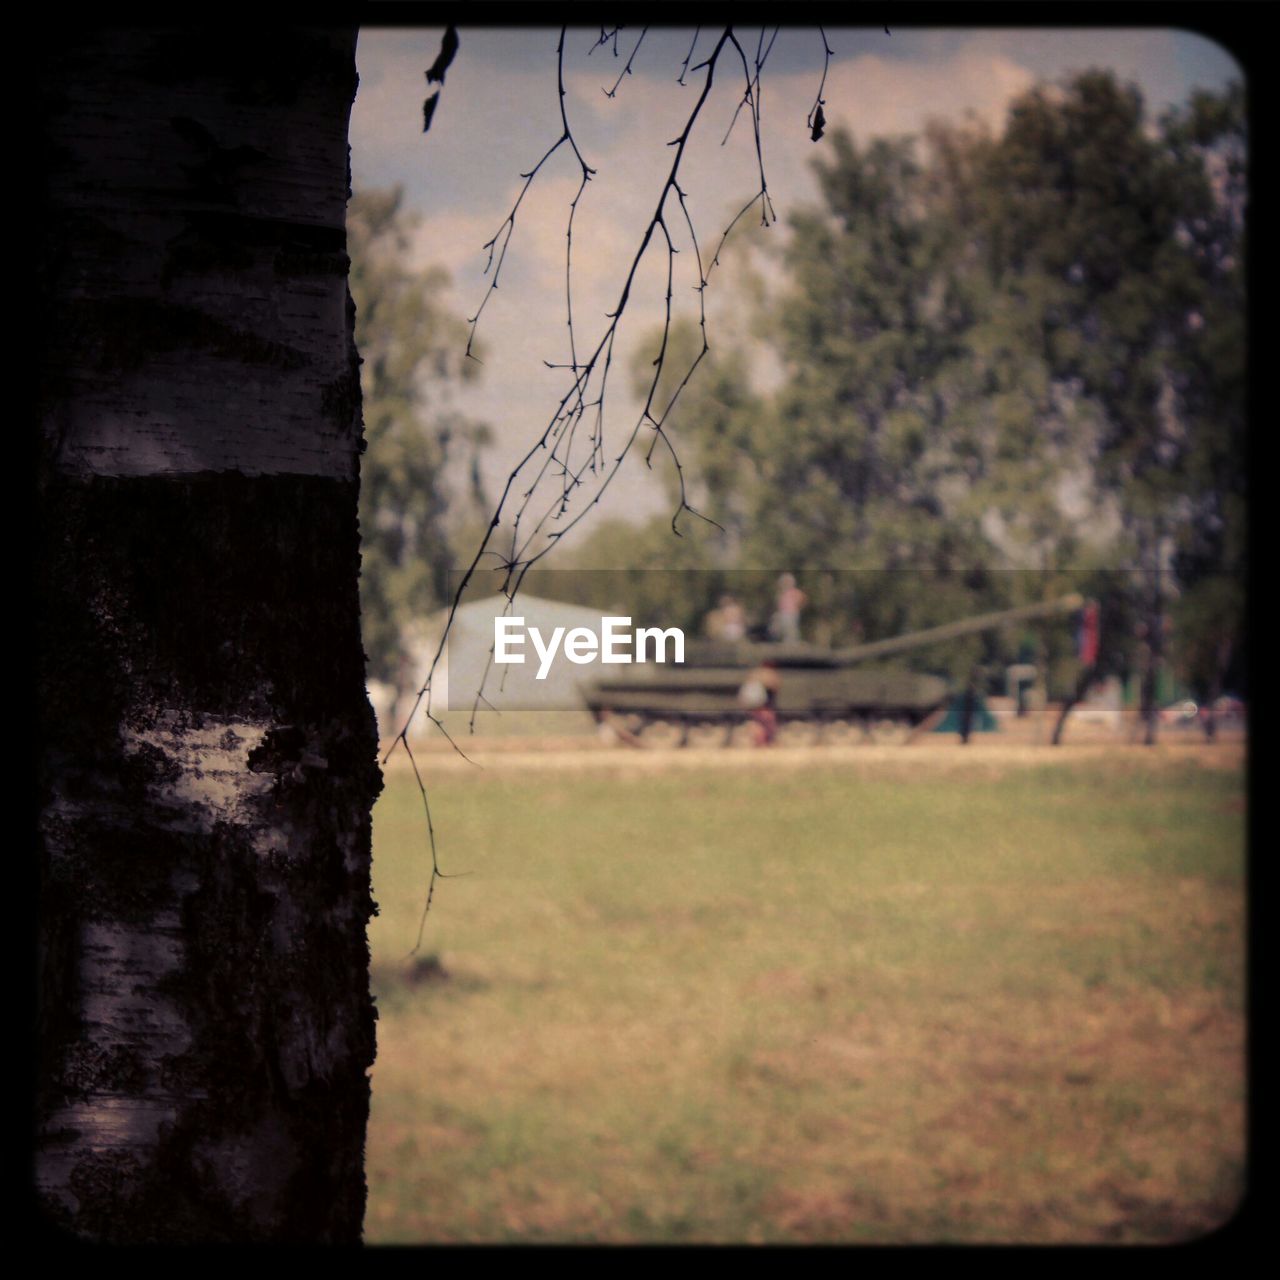 Cropped image of tree against tank on field